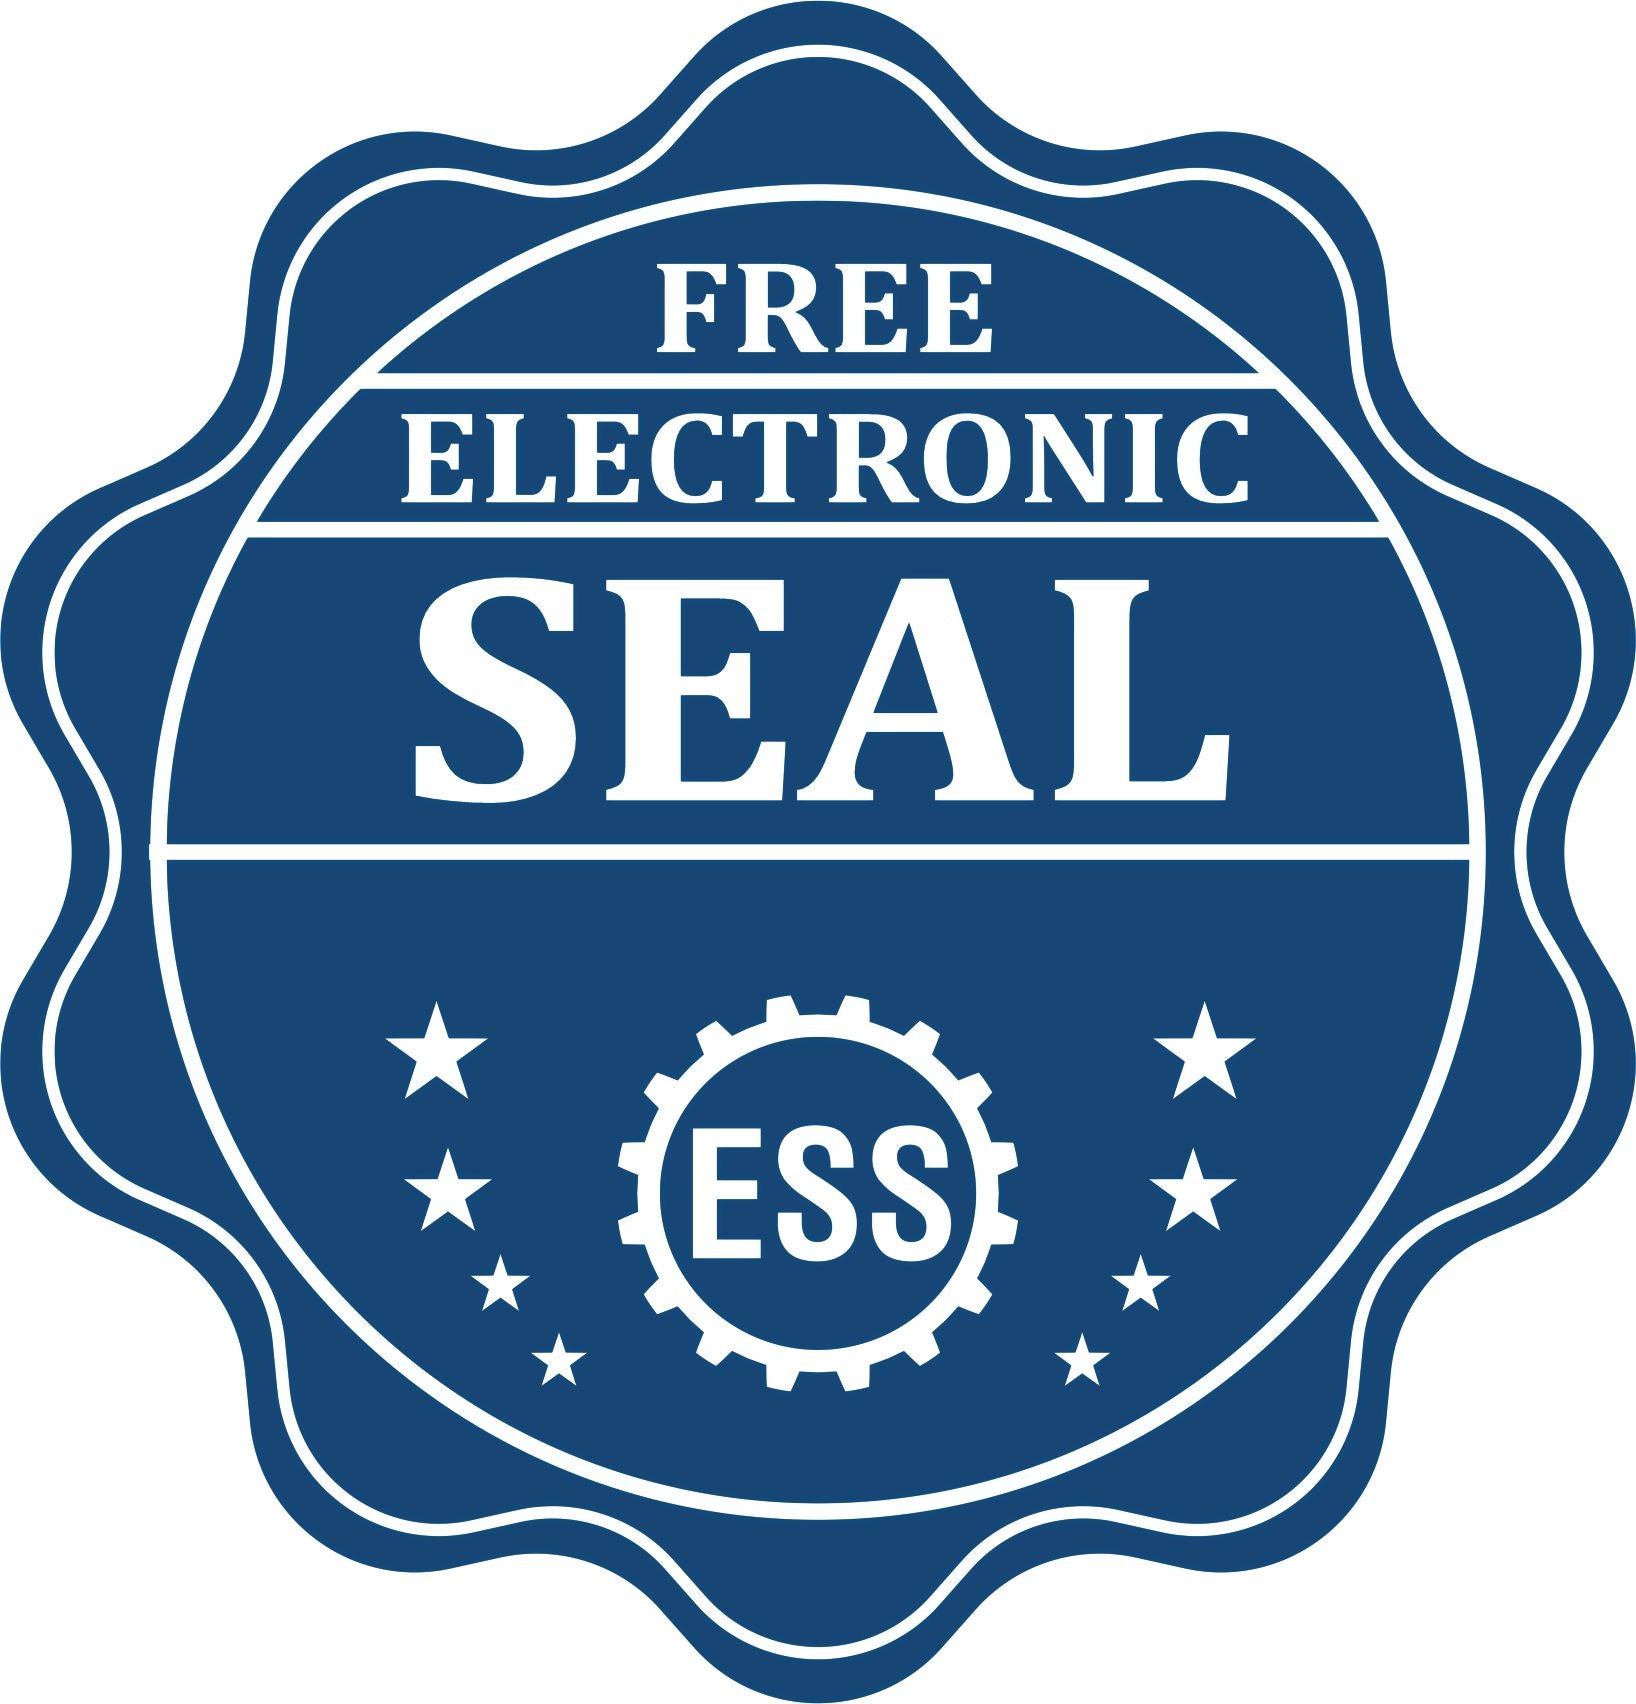 A badge showing a free electronic seal for the Wisconsin Engineer Desk Seal with stars and the ESS gear on the emblem.